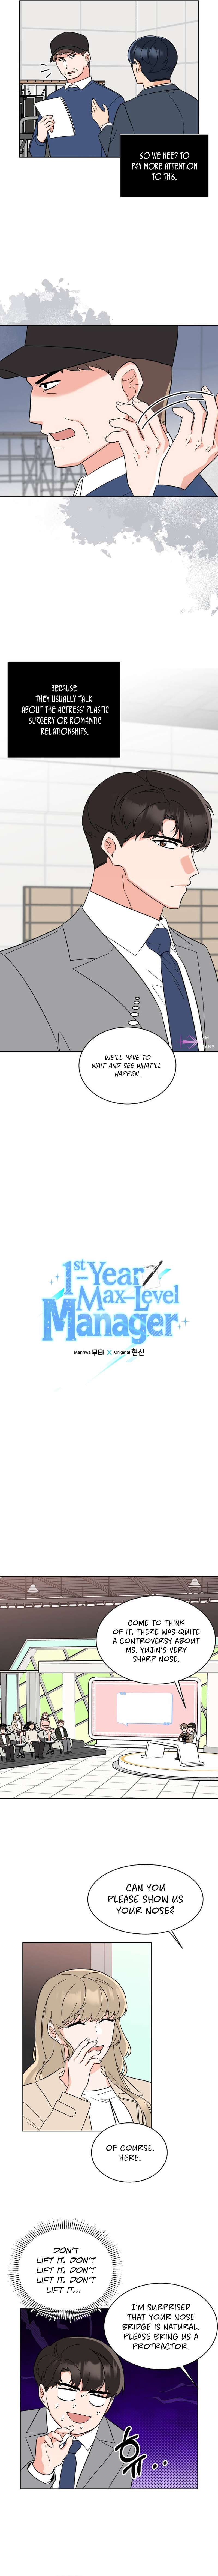 1st year Max Level Manager Chapter 118 page 3